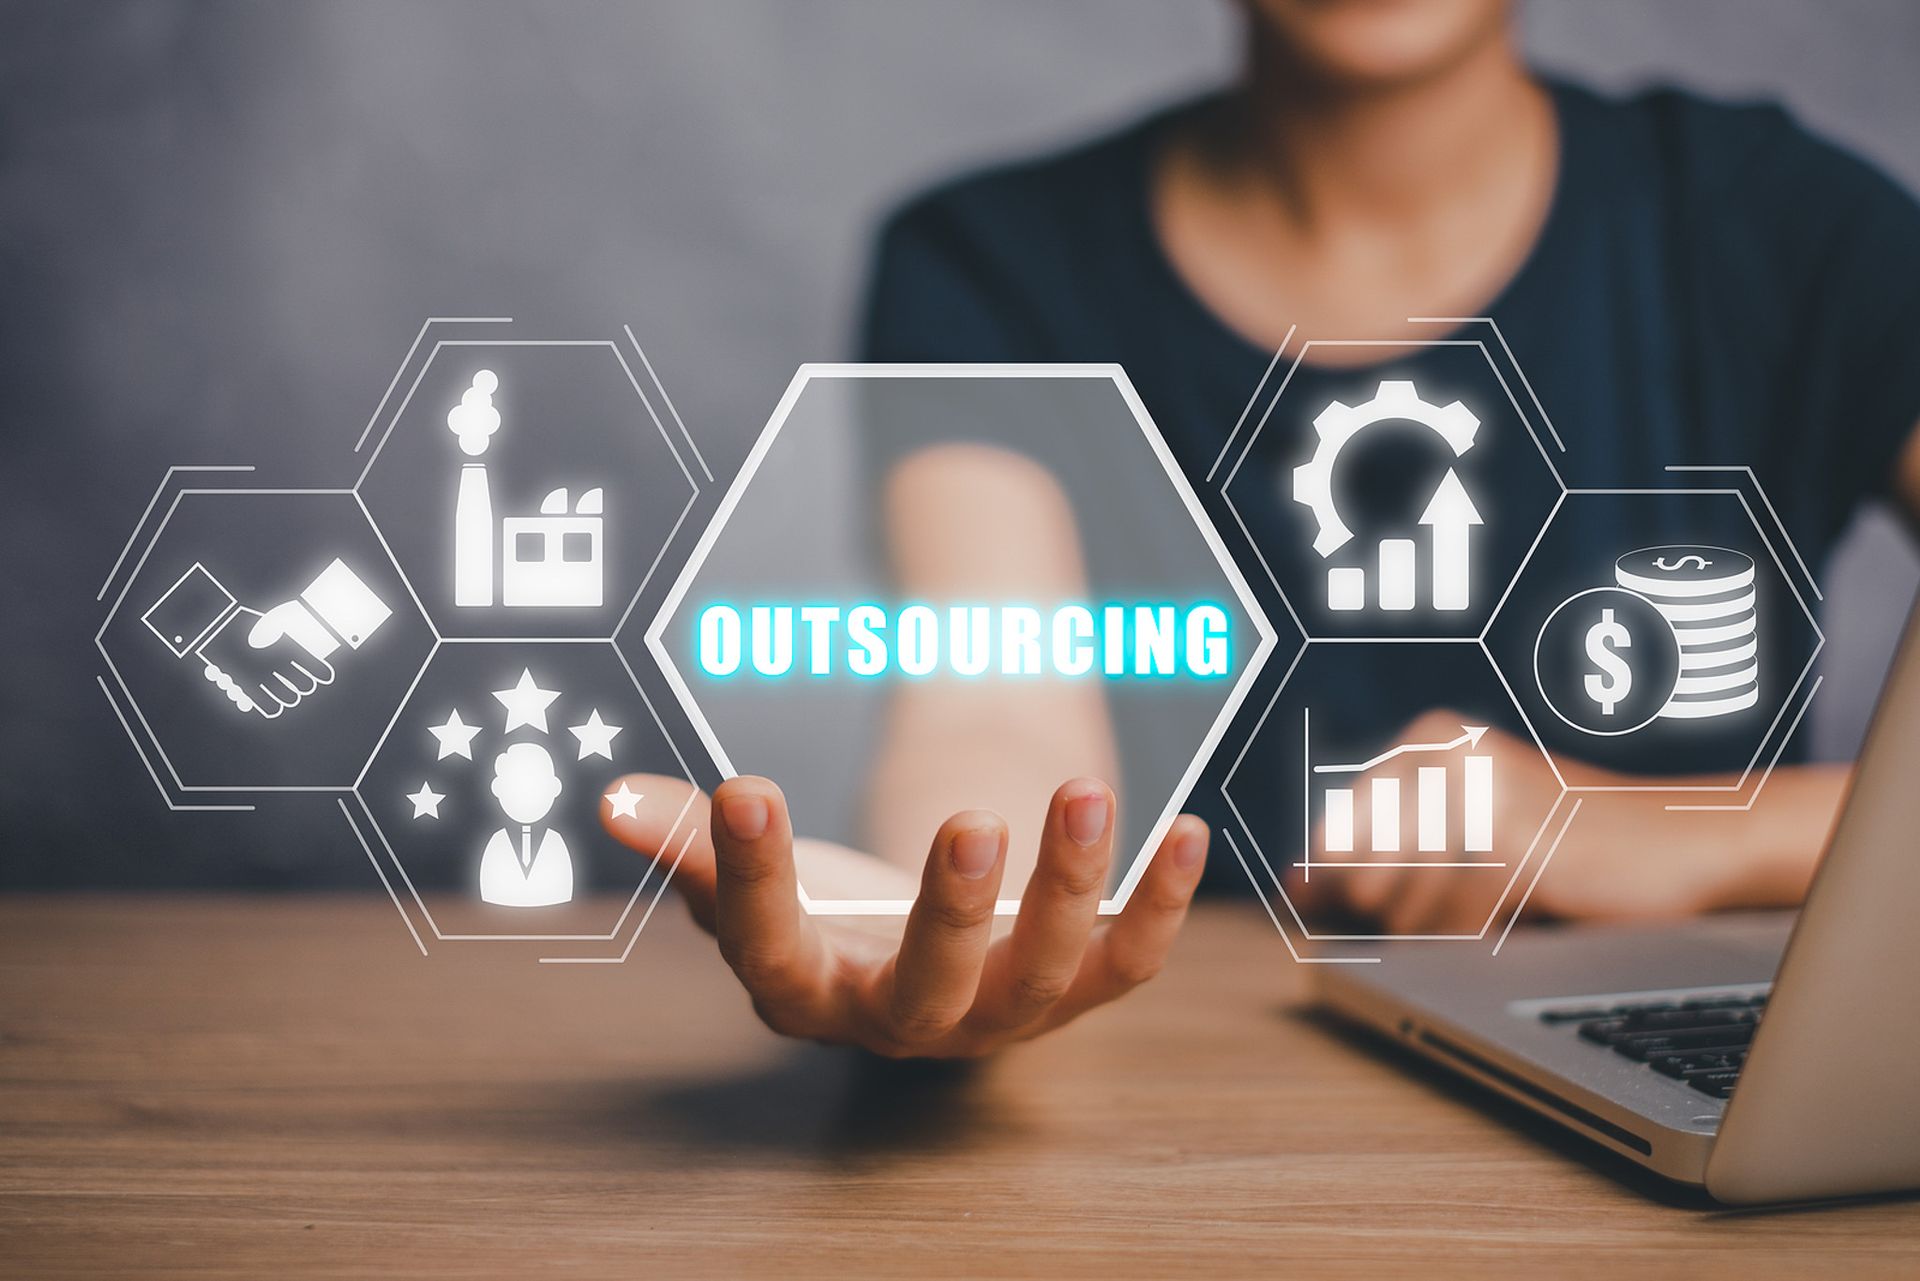 business process outsourcing outsource print production outsource magazine layout outsource print